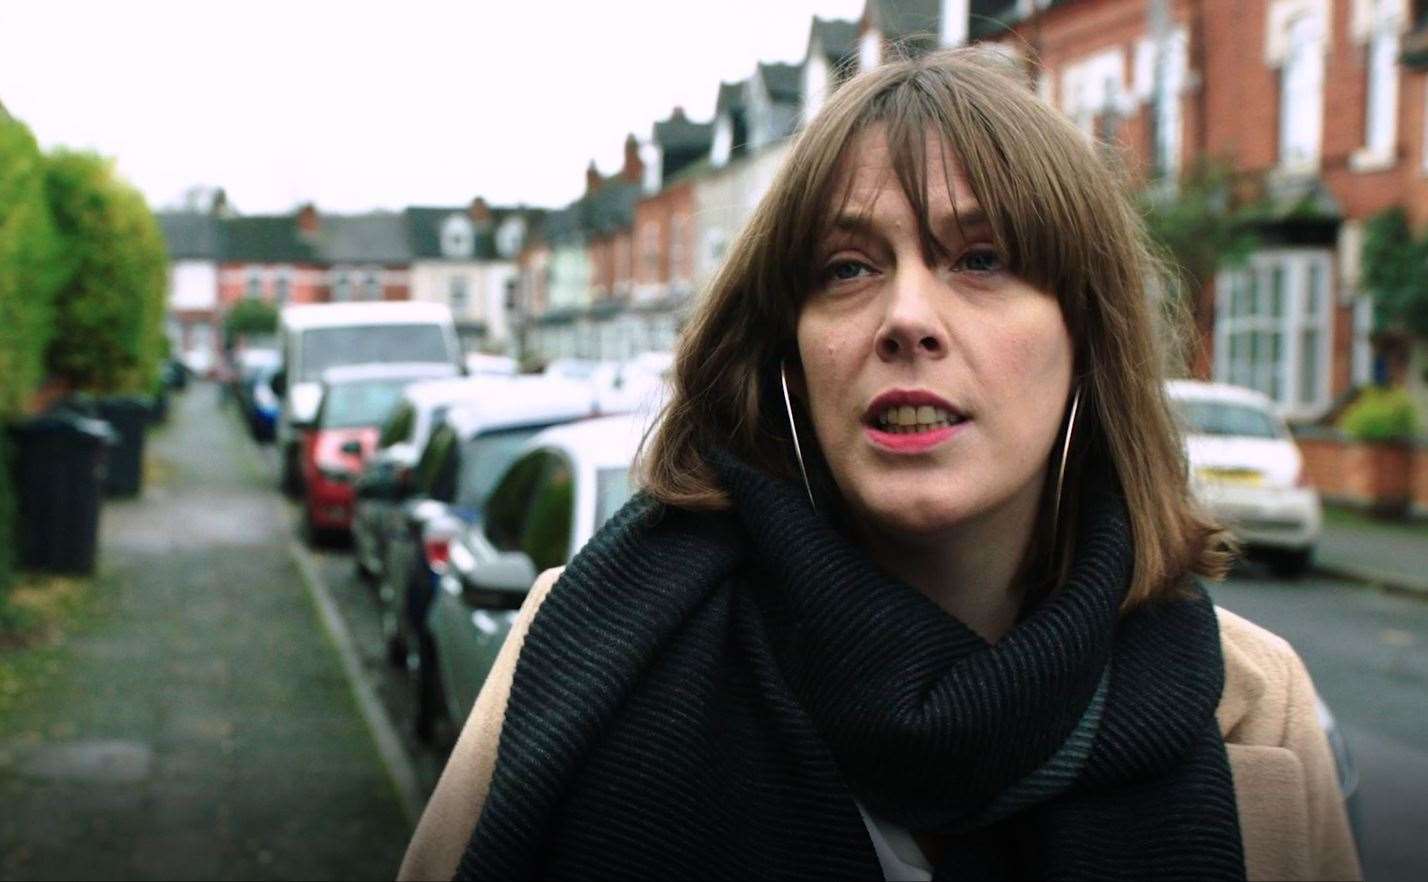 Labour MP Jess Phillips said the lack of action sent a ‘terrible message’ about Westminster culture (Jess Phillips/PA)